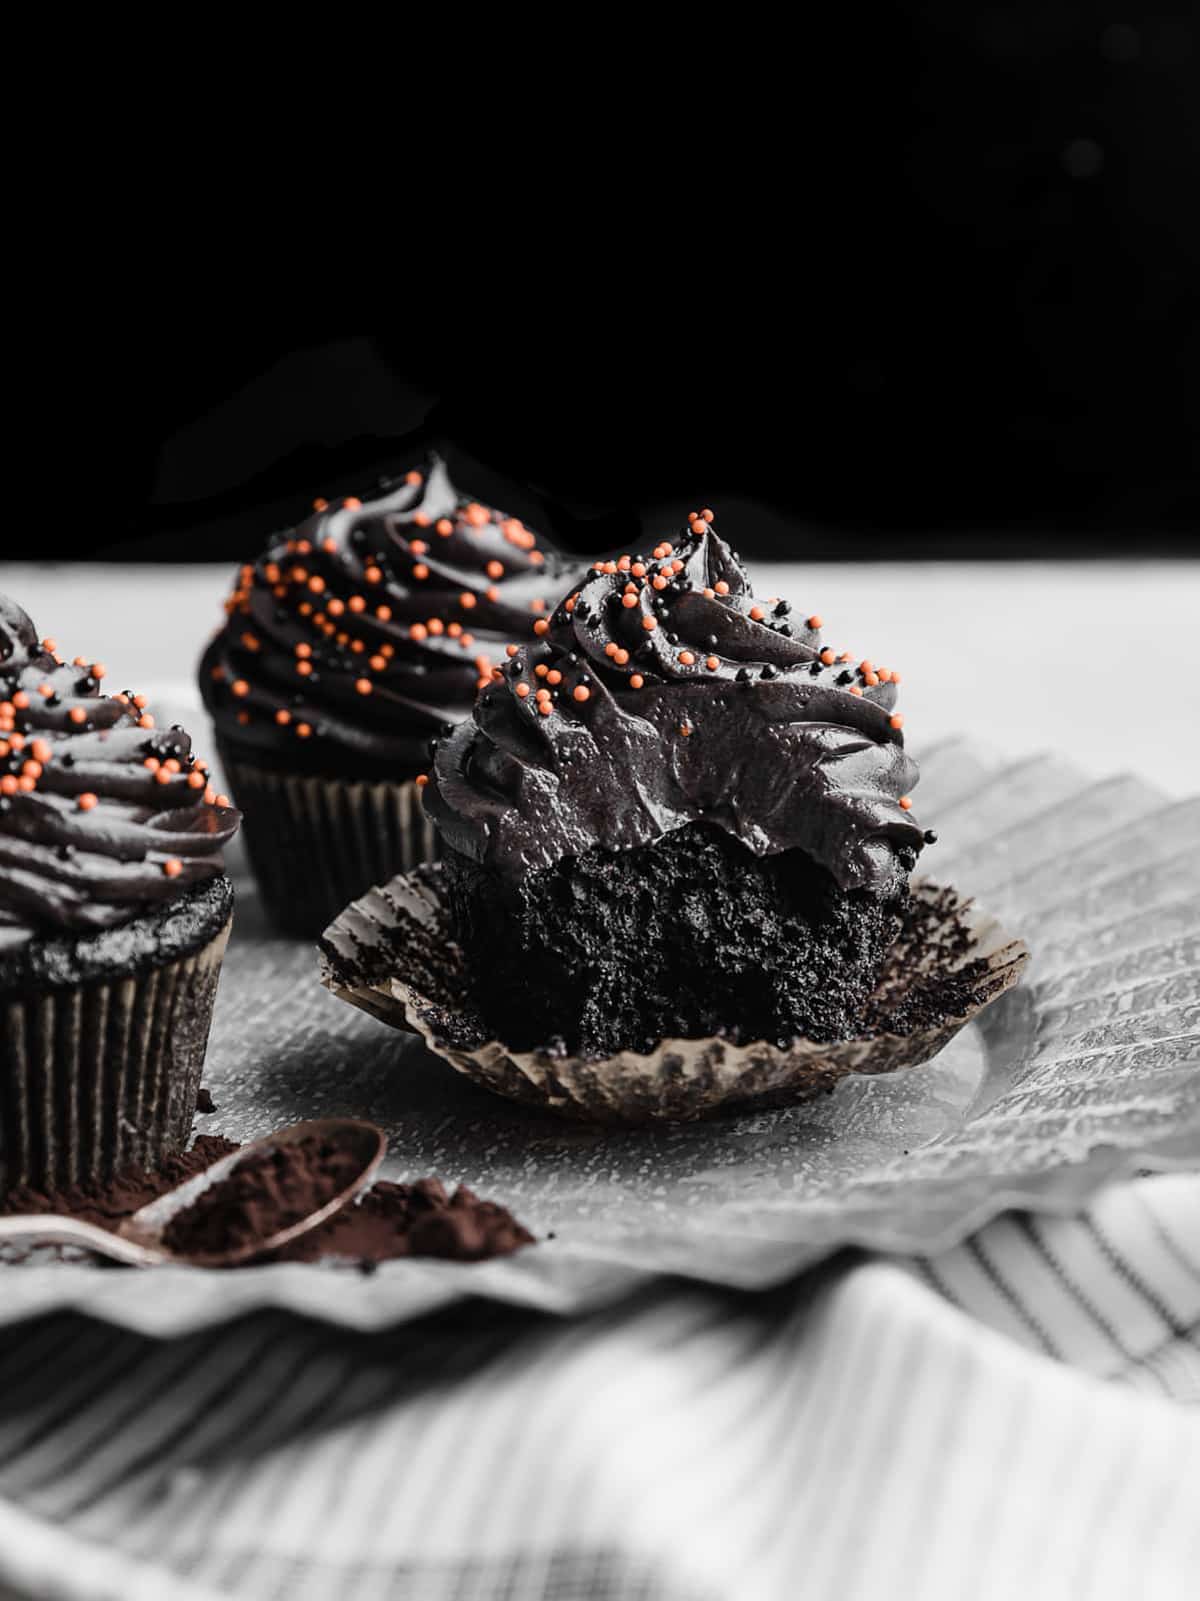 A Black Velvet Cupcake on a gray metal plate with a bite taken out of the cupcake.